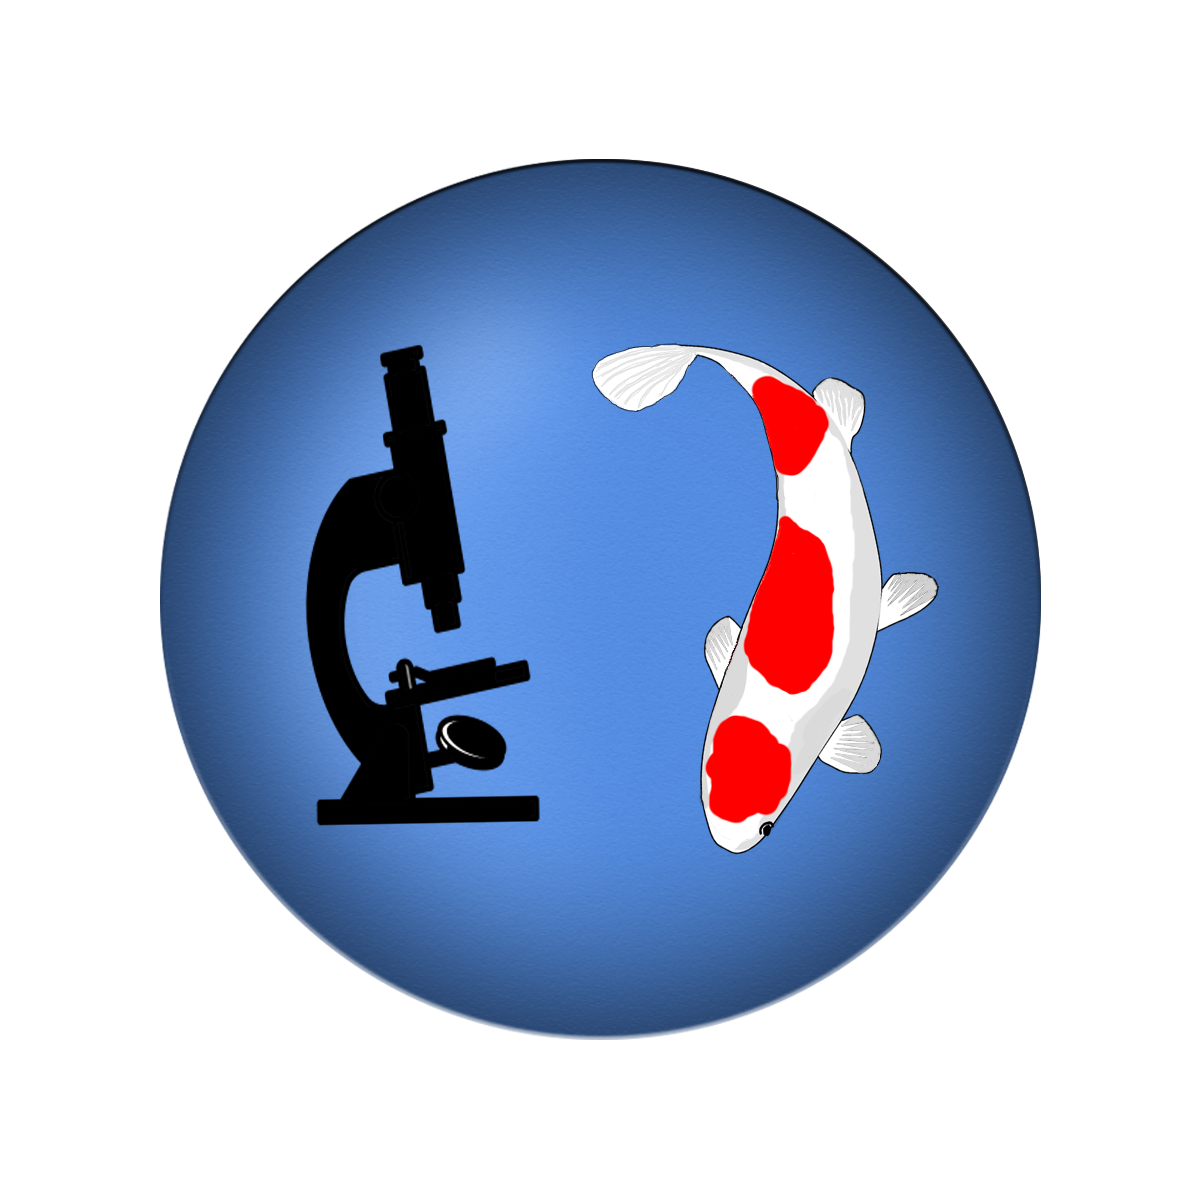 The Pond Health Consultant